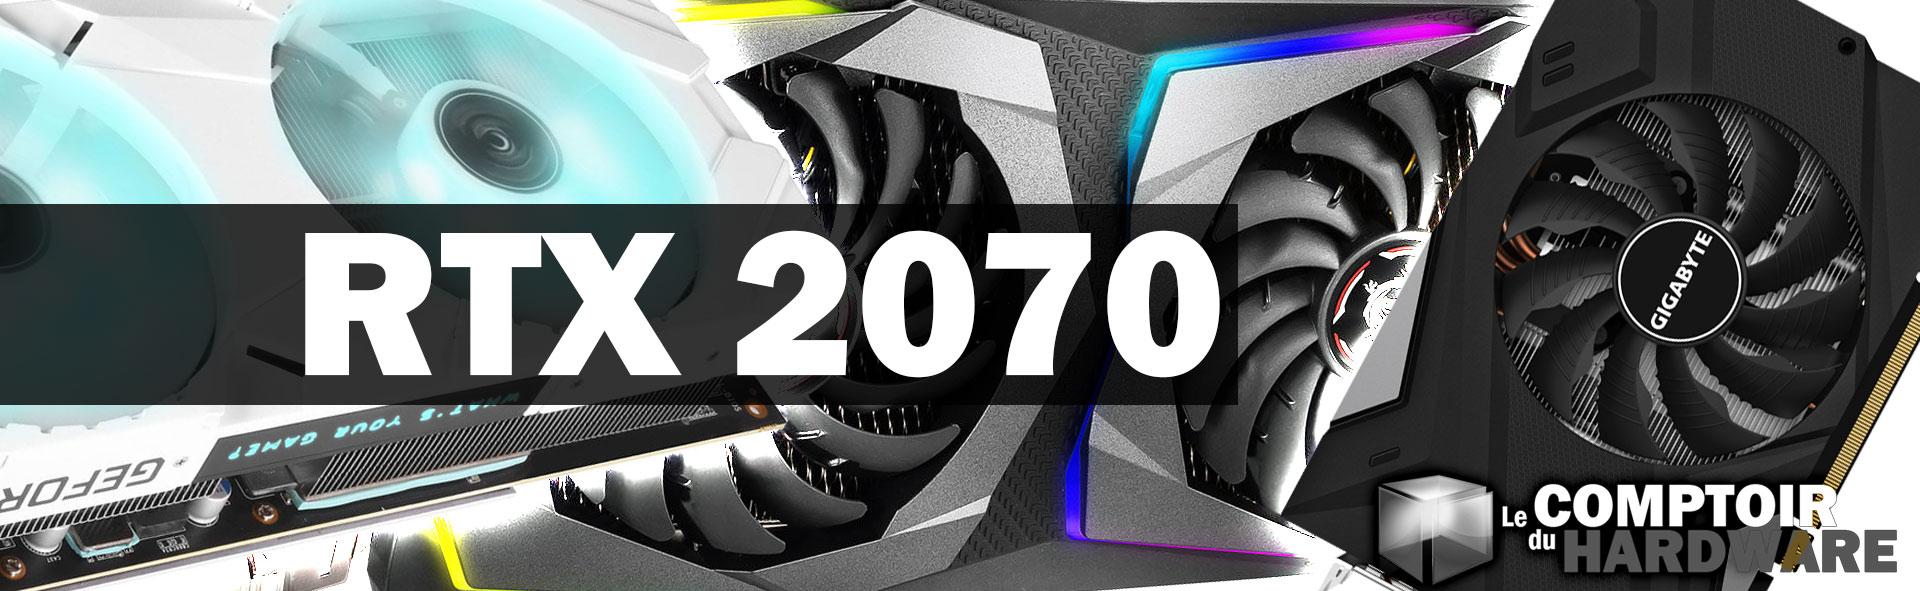 all rtx 2070 on the french market